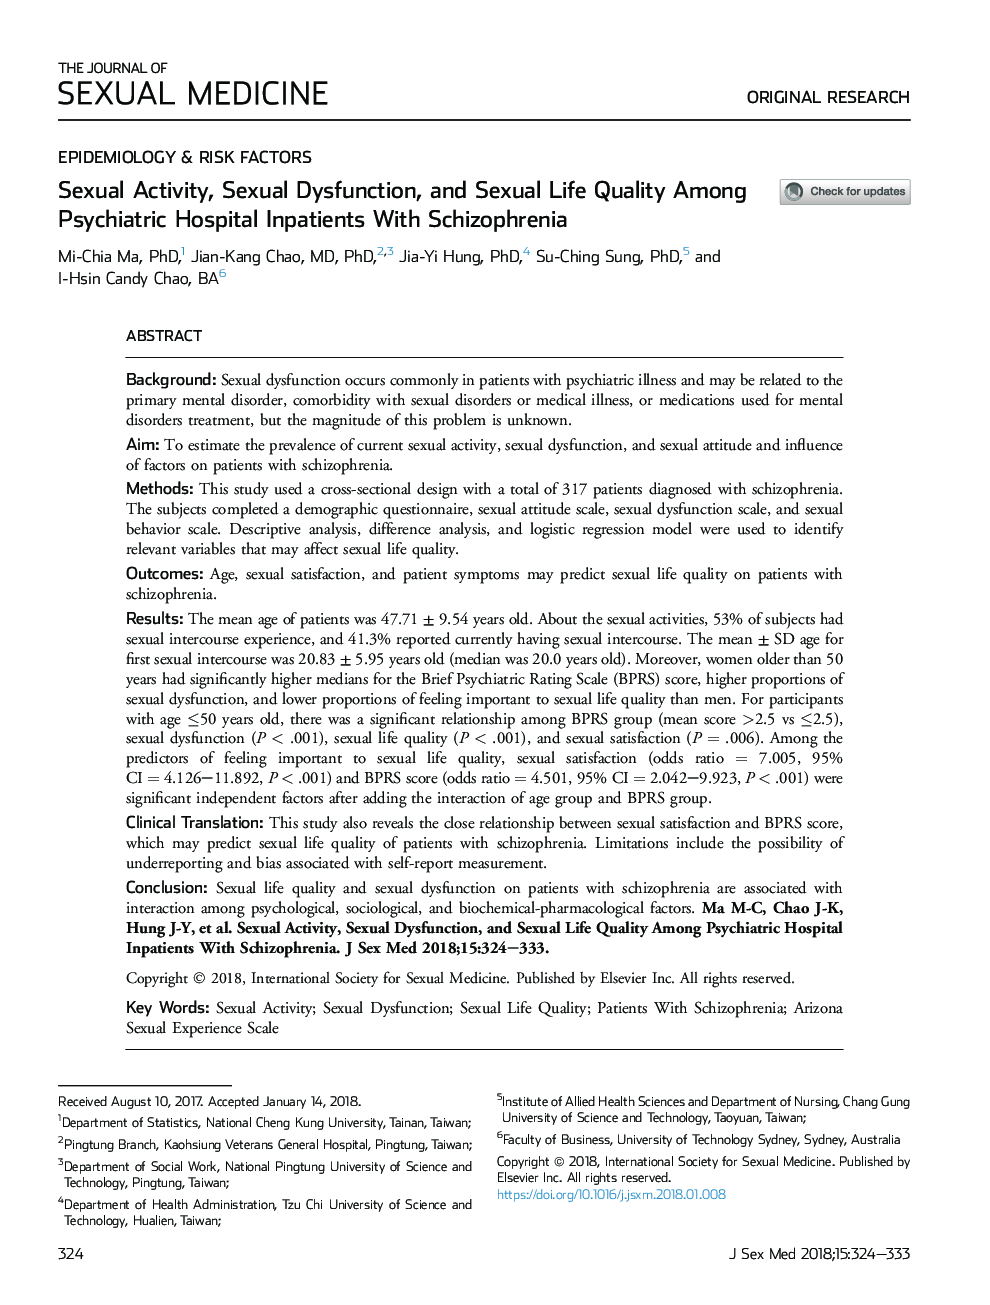 Sexual Activity, Sexual Dysfunction, and Sexual Life Quality Among Psychiatric Hospital Inpatients With Schizophrenia